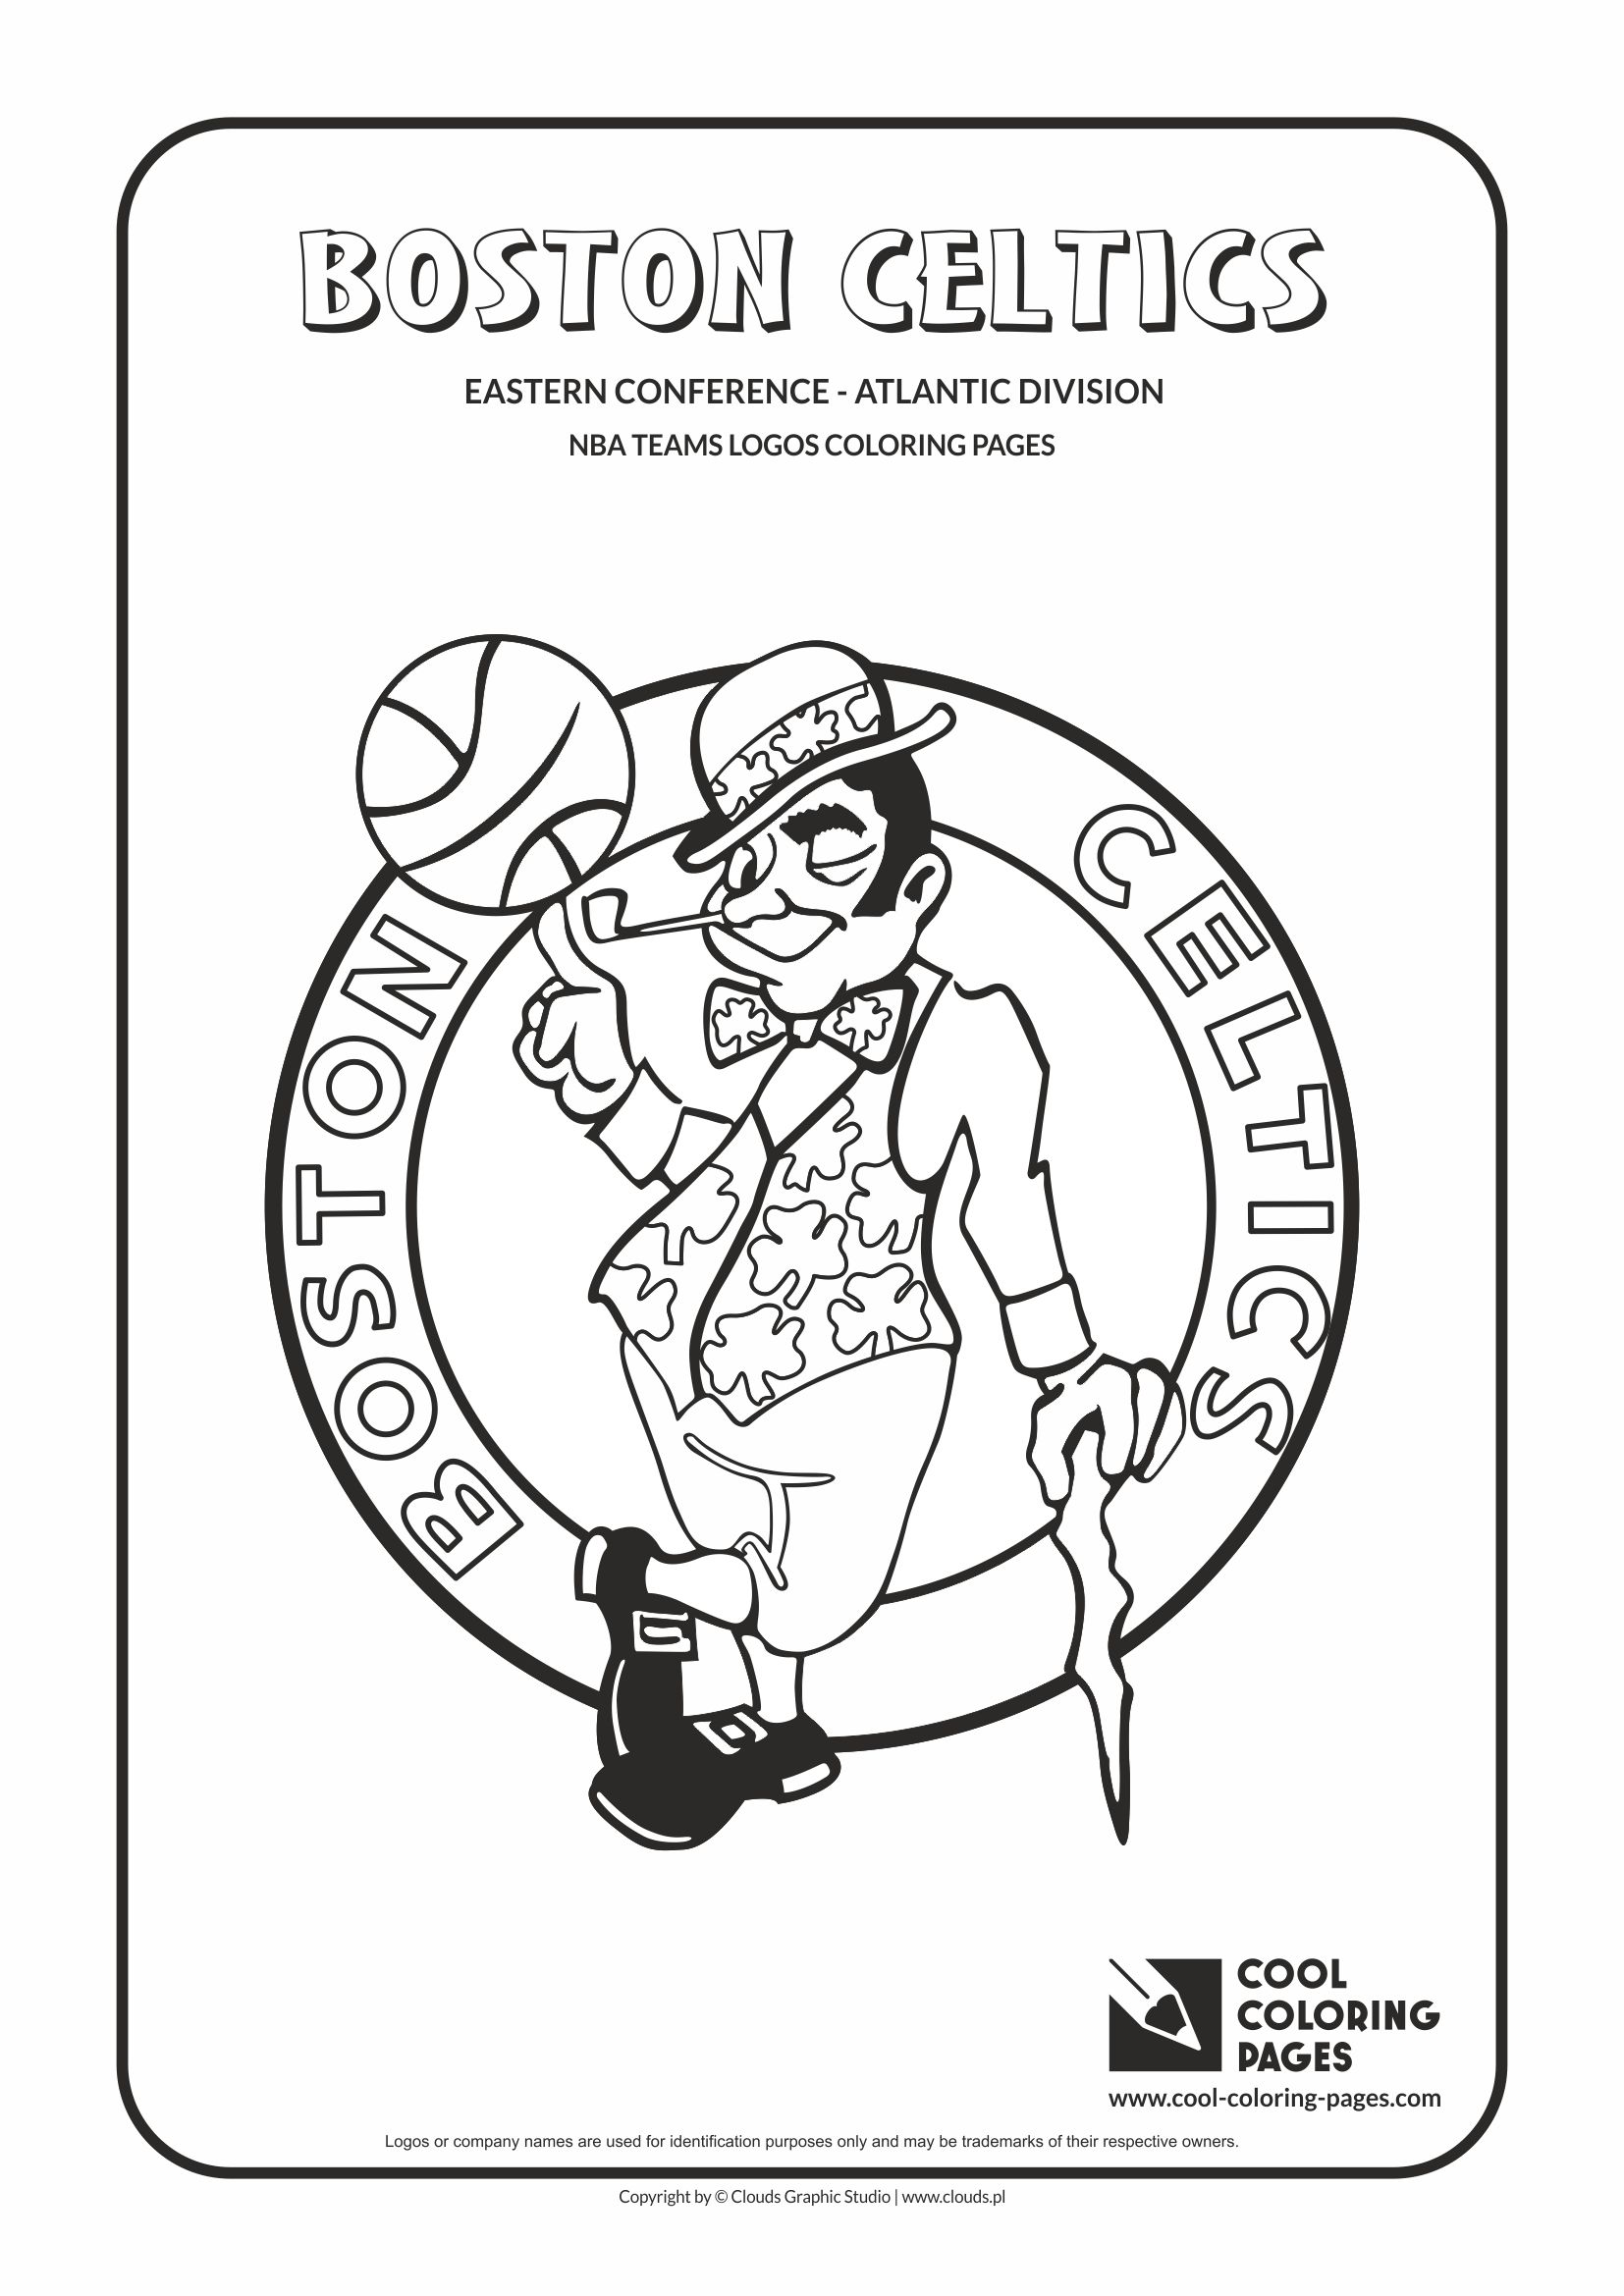 Cool Coloring Pages Boston Celtics - NBA basketball teams logos coloring  pages - Cool Coloring Pages | Free educational coloring pages and  activities for kids